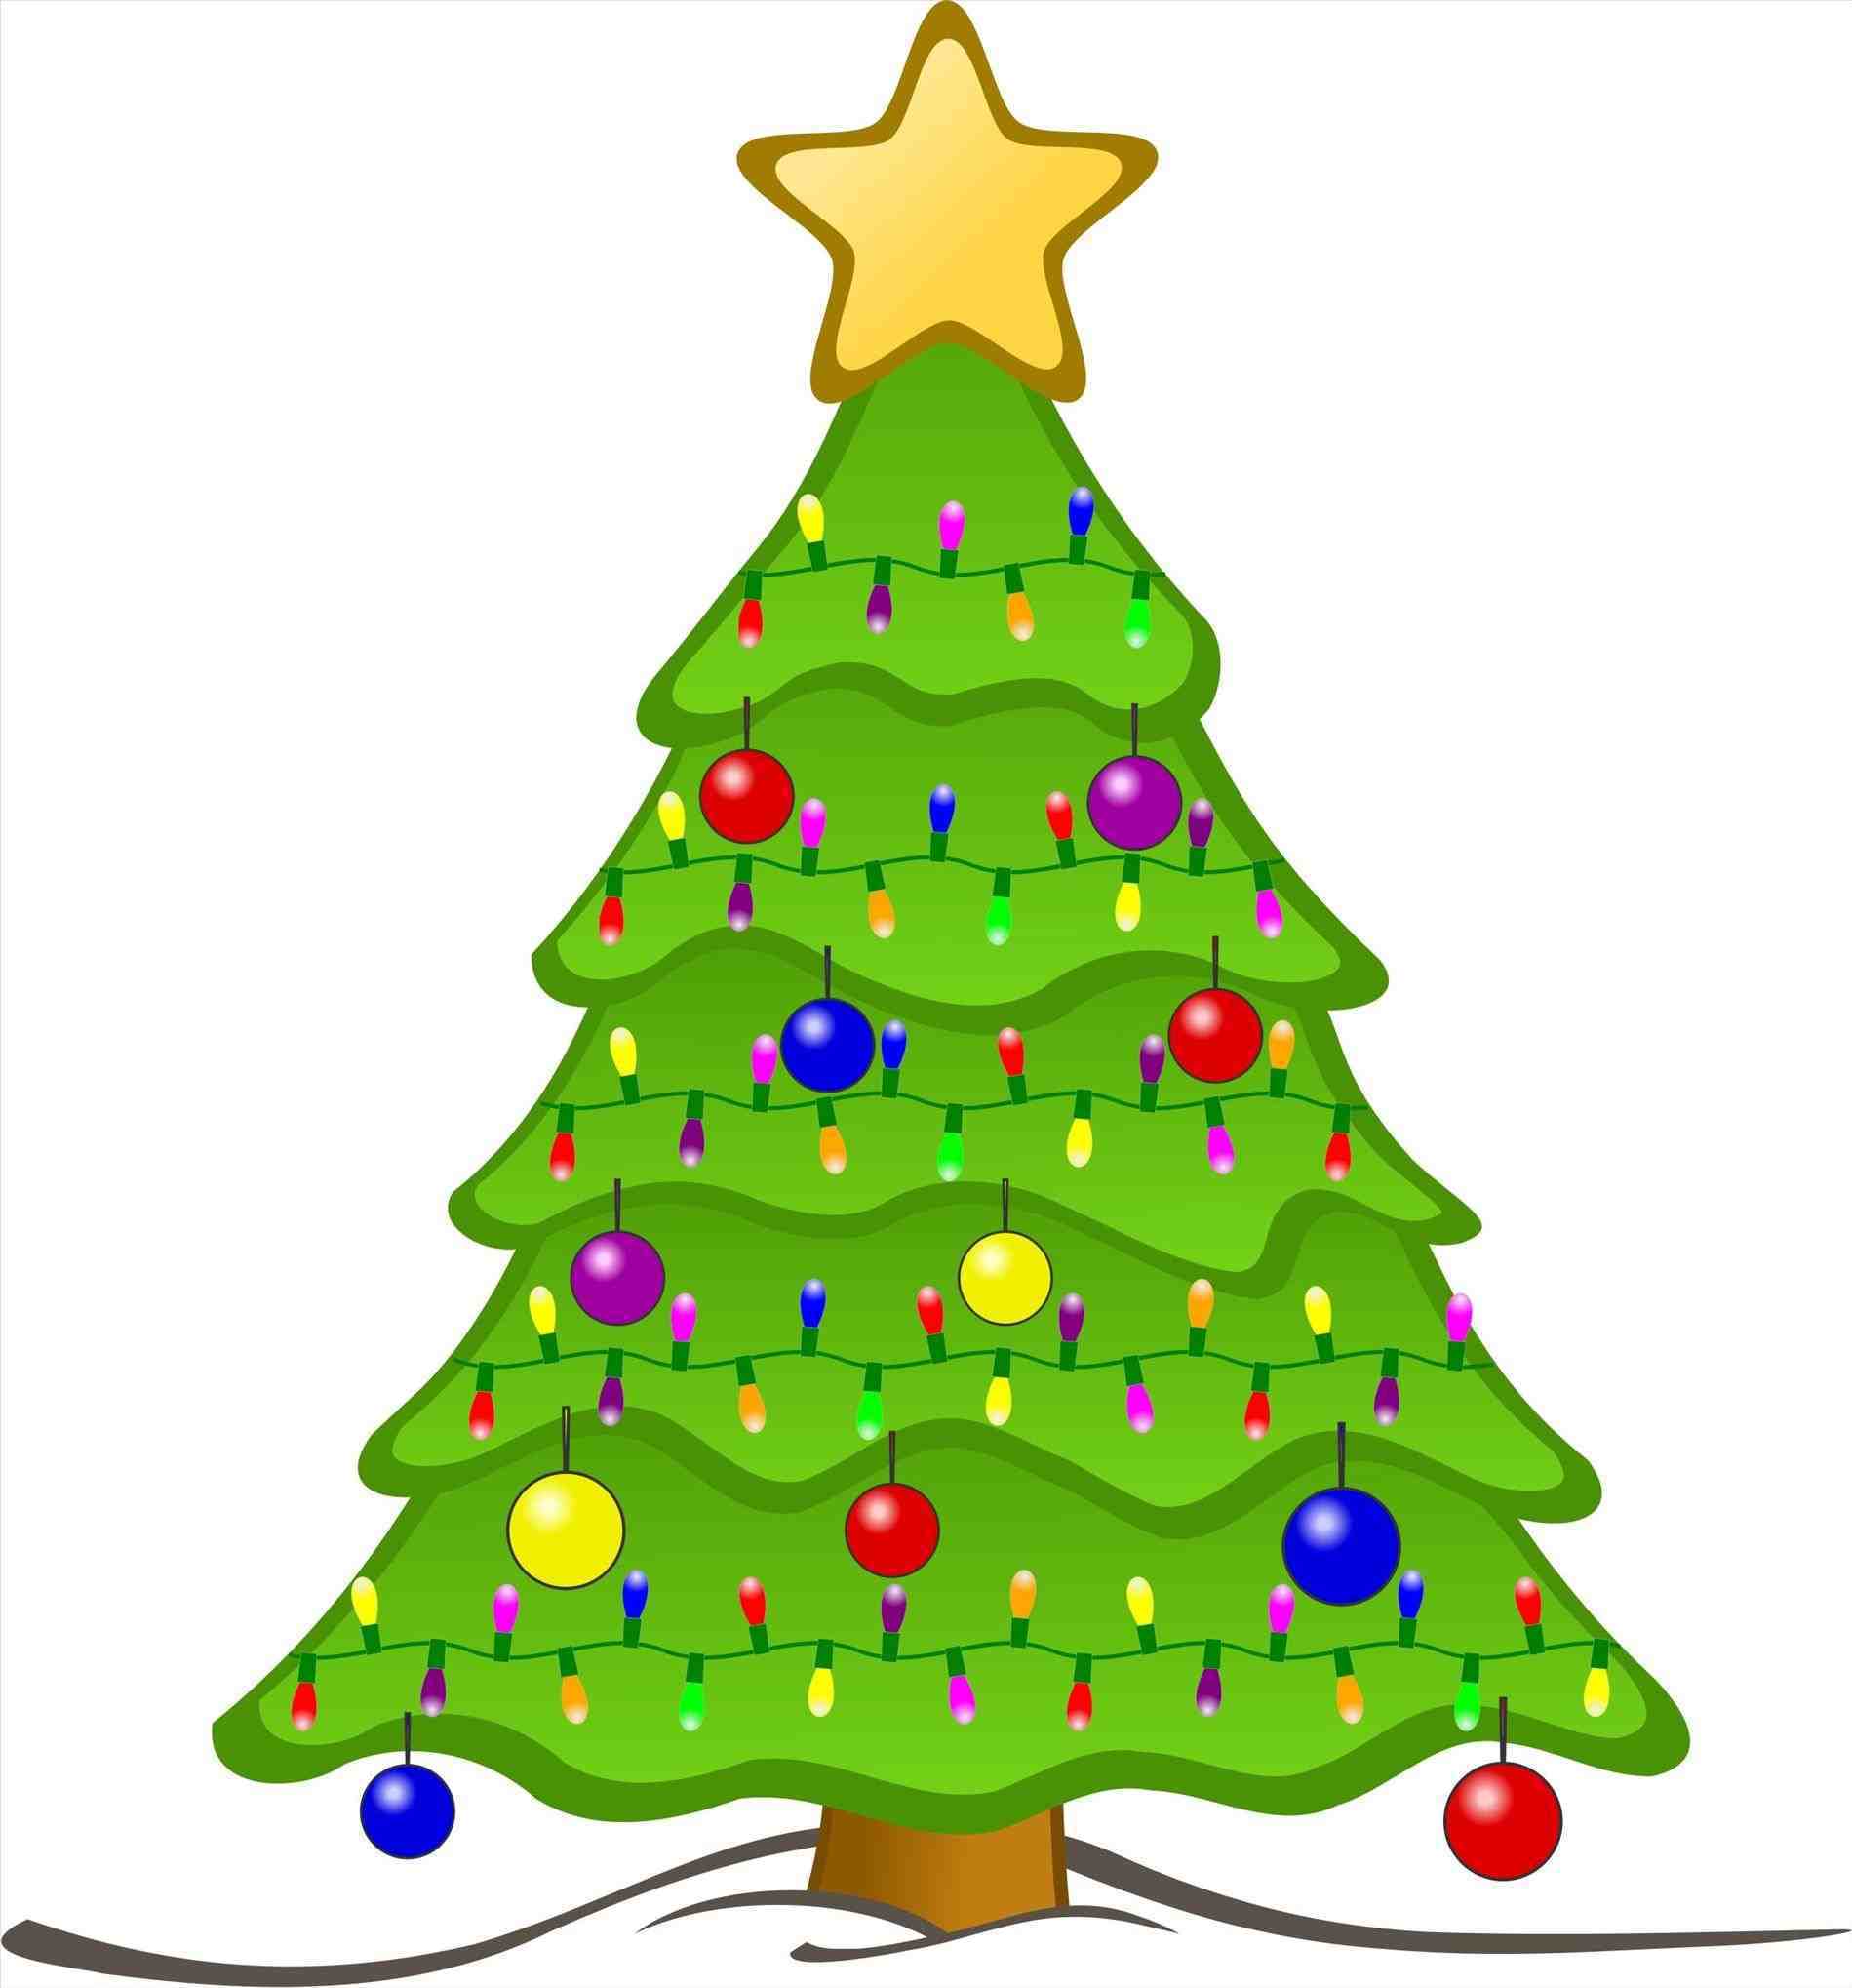 Blender clipart animated. U fun for christmasrhhalloweenfunnet